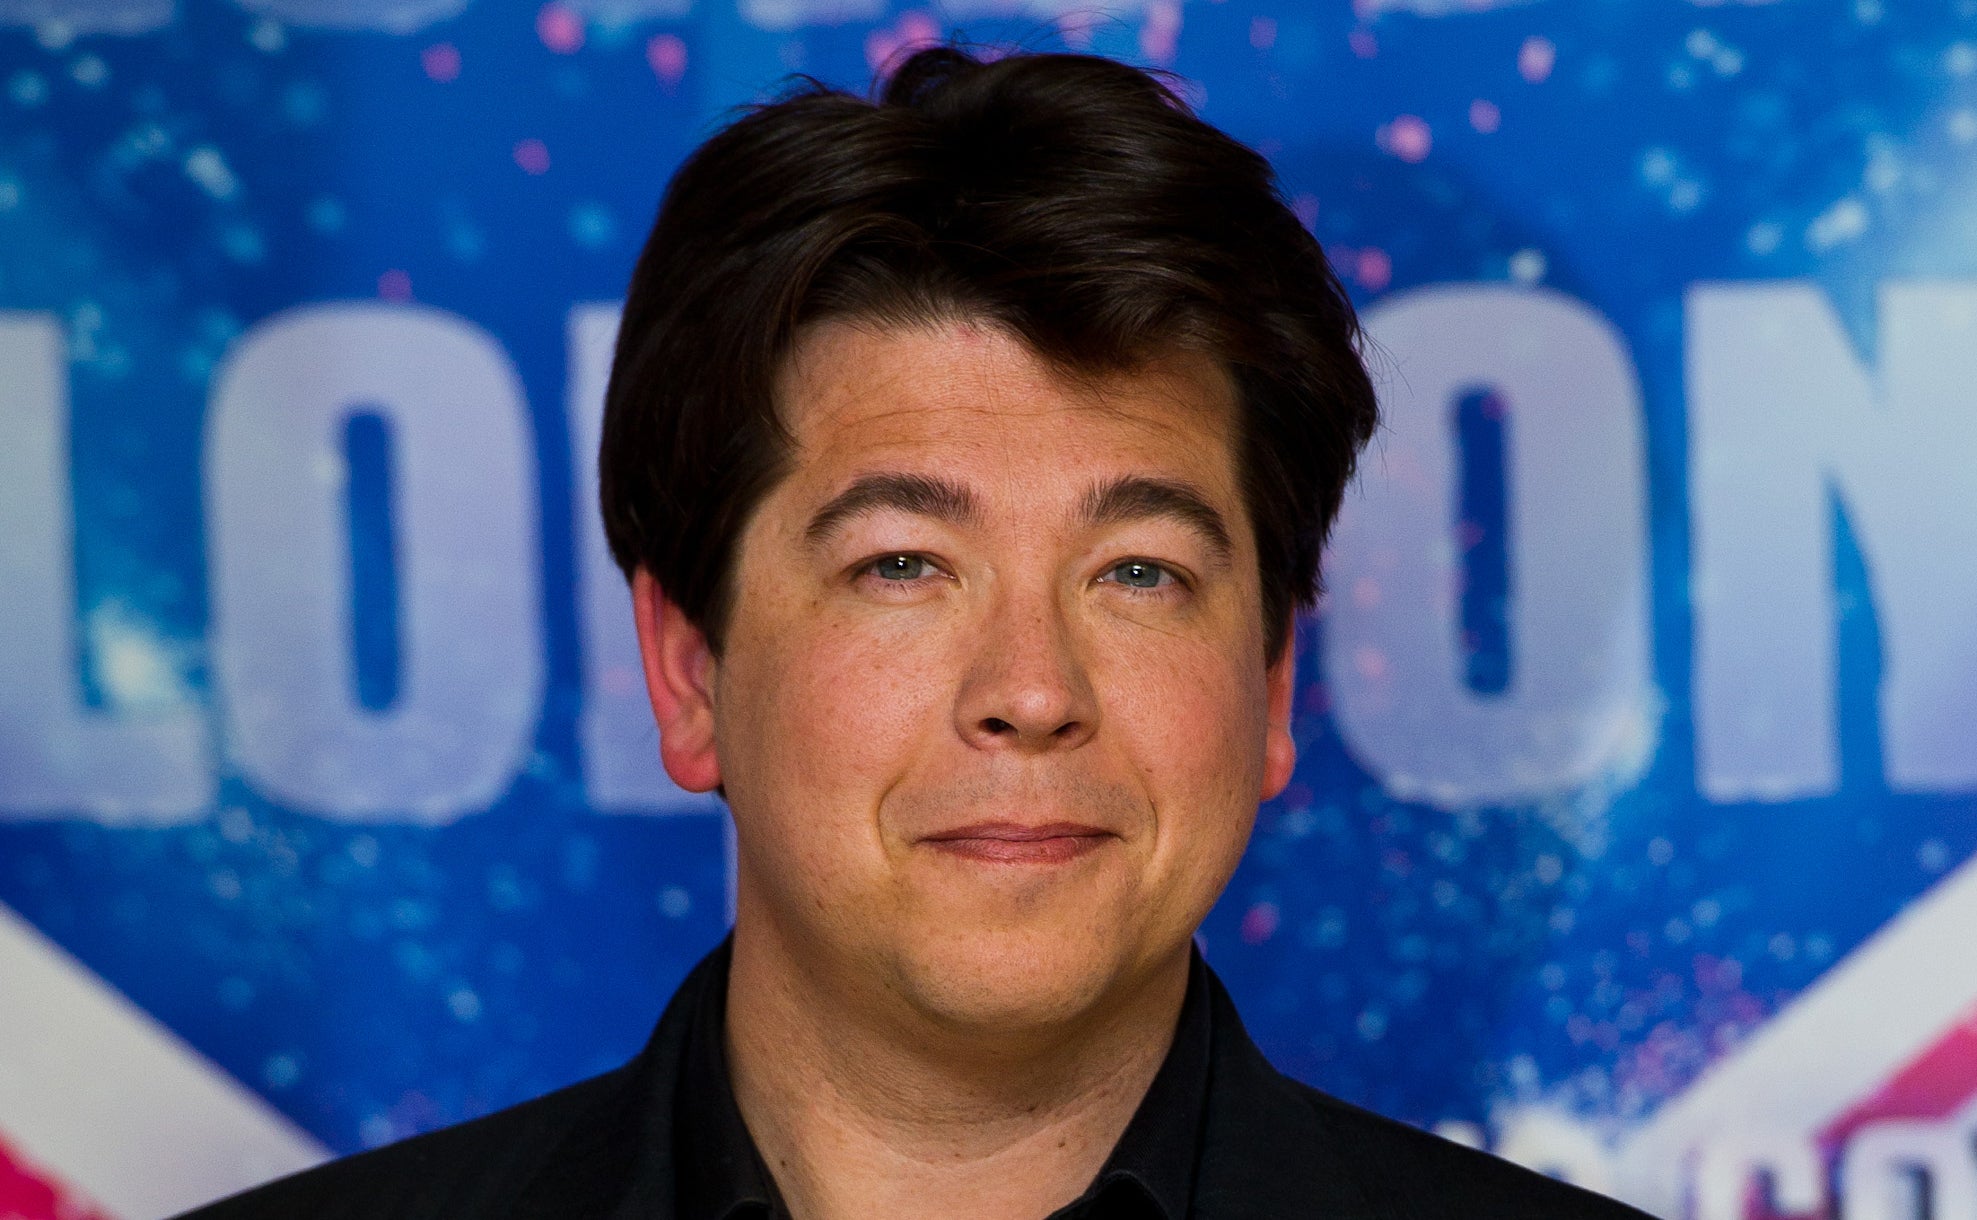 The stepmother of Michael McIntyre has revealed that the comedian's father died of suicide, not a heart attack